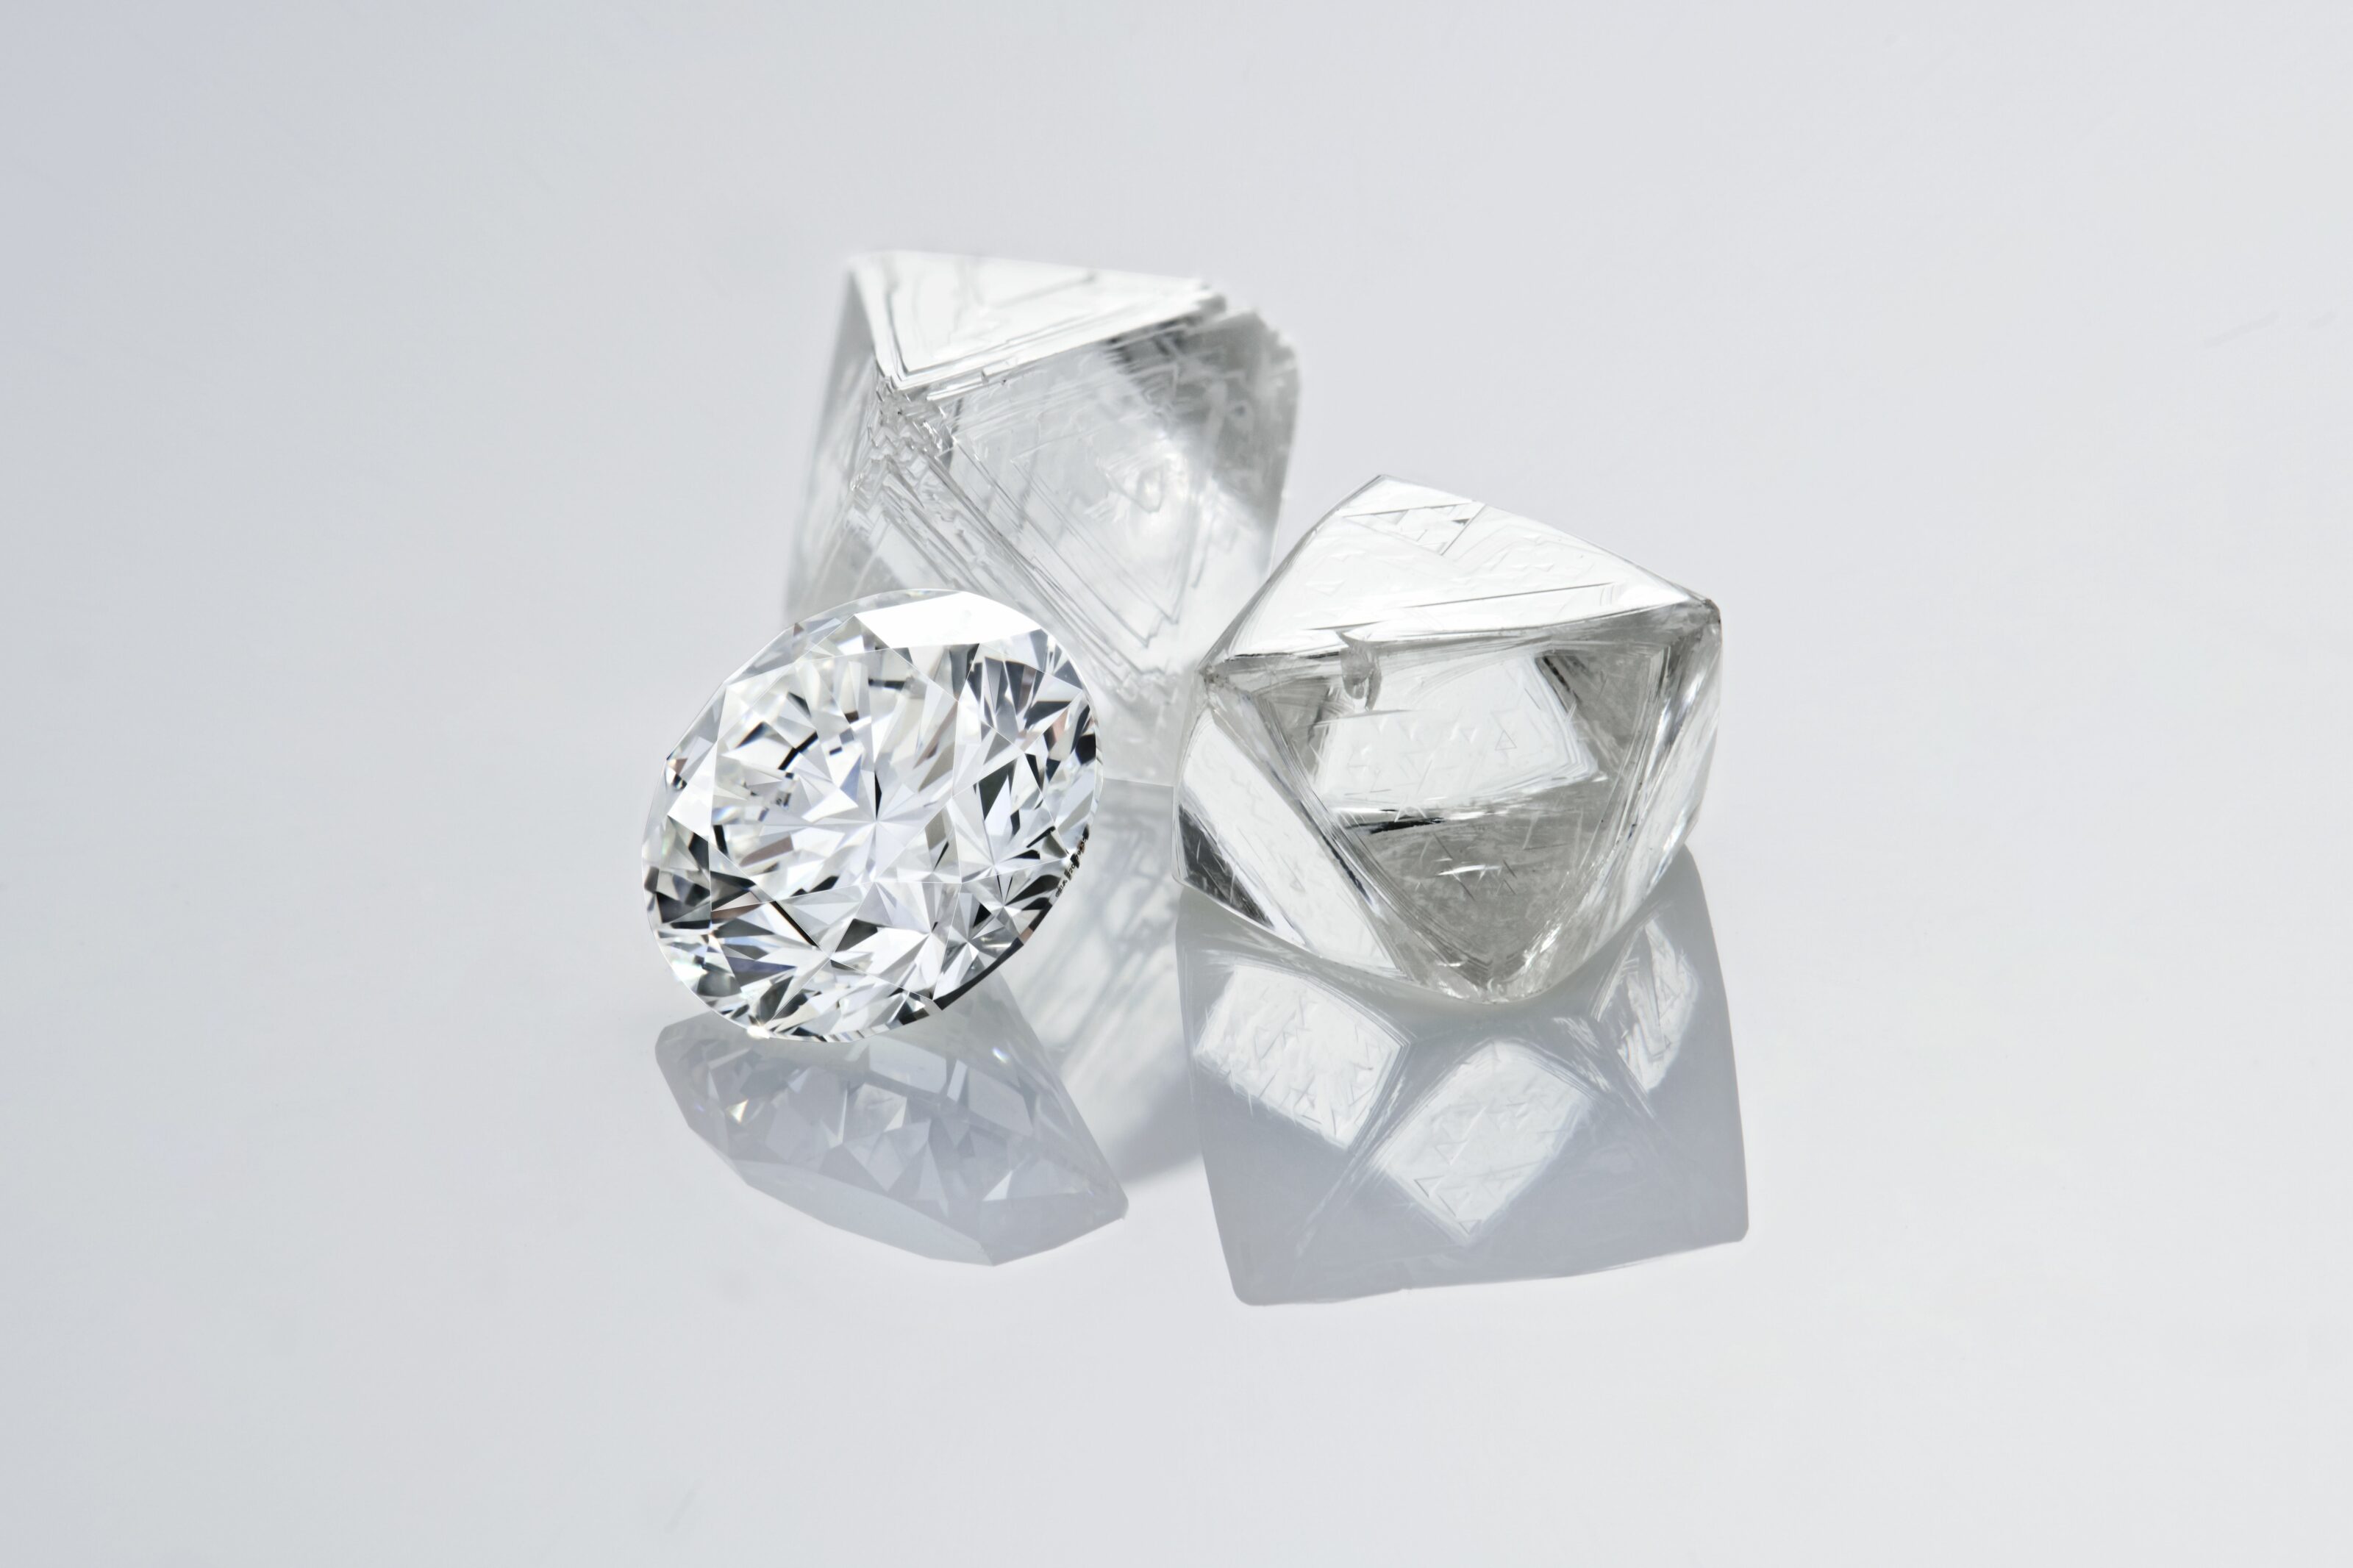 Rough and polished natural diamonds